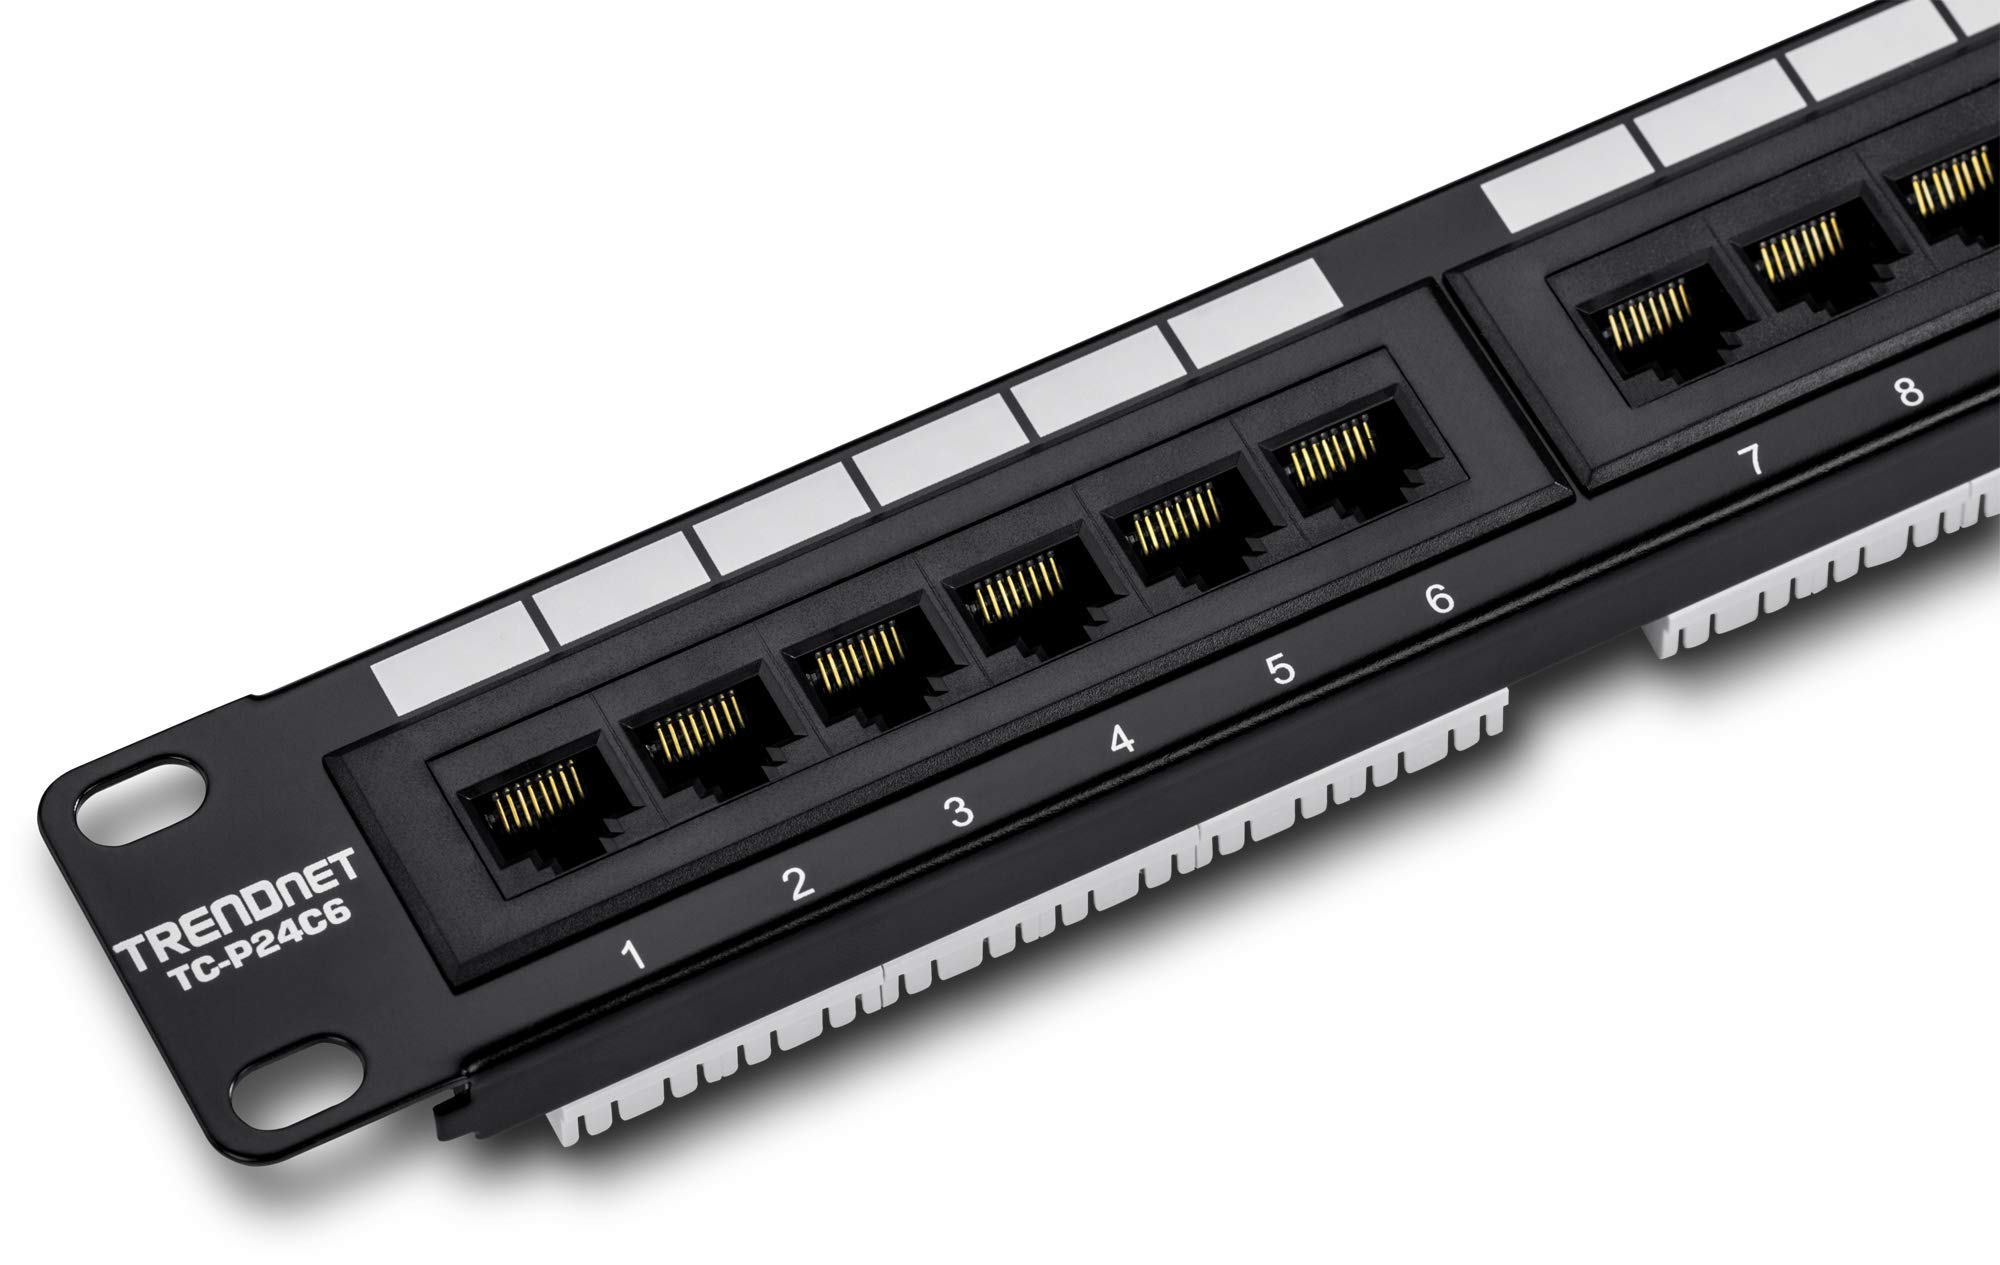 Book Cover TRENDnet 24-Port Cat6 Unshielded Patch Panel, Wallmount or Rackmount, Compatible with Cat3,4,5,5e,6 Cabling, For Ethernet, Fast Ethernet, Gigabit Applications, Black, TC-P24C6 Rack Mount